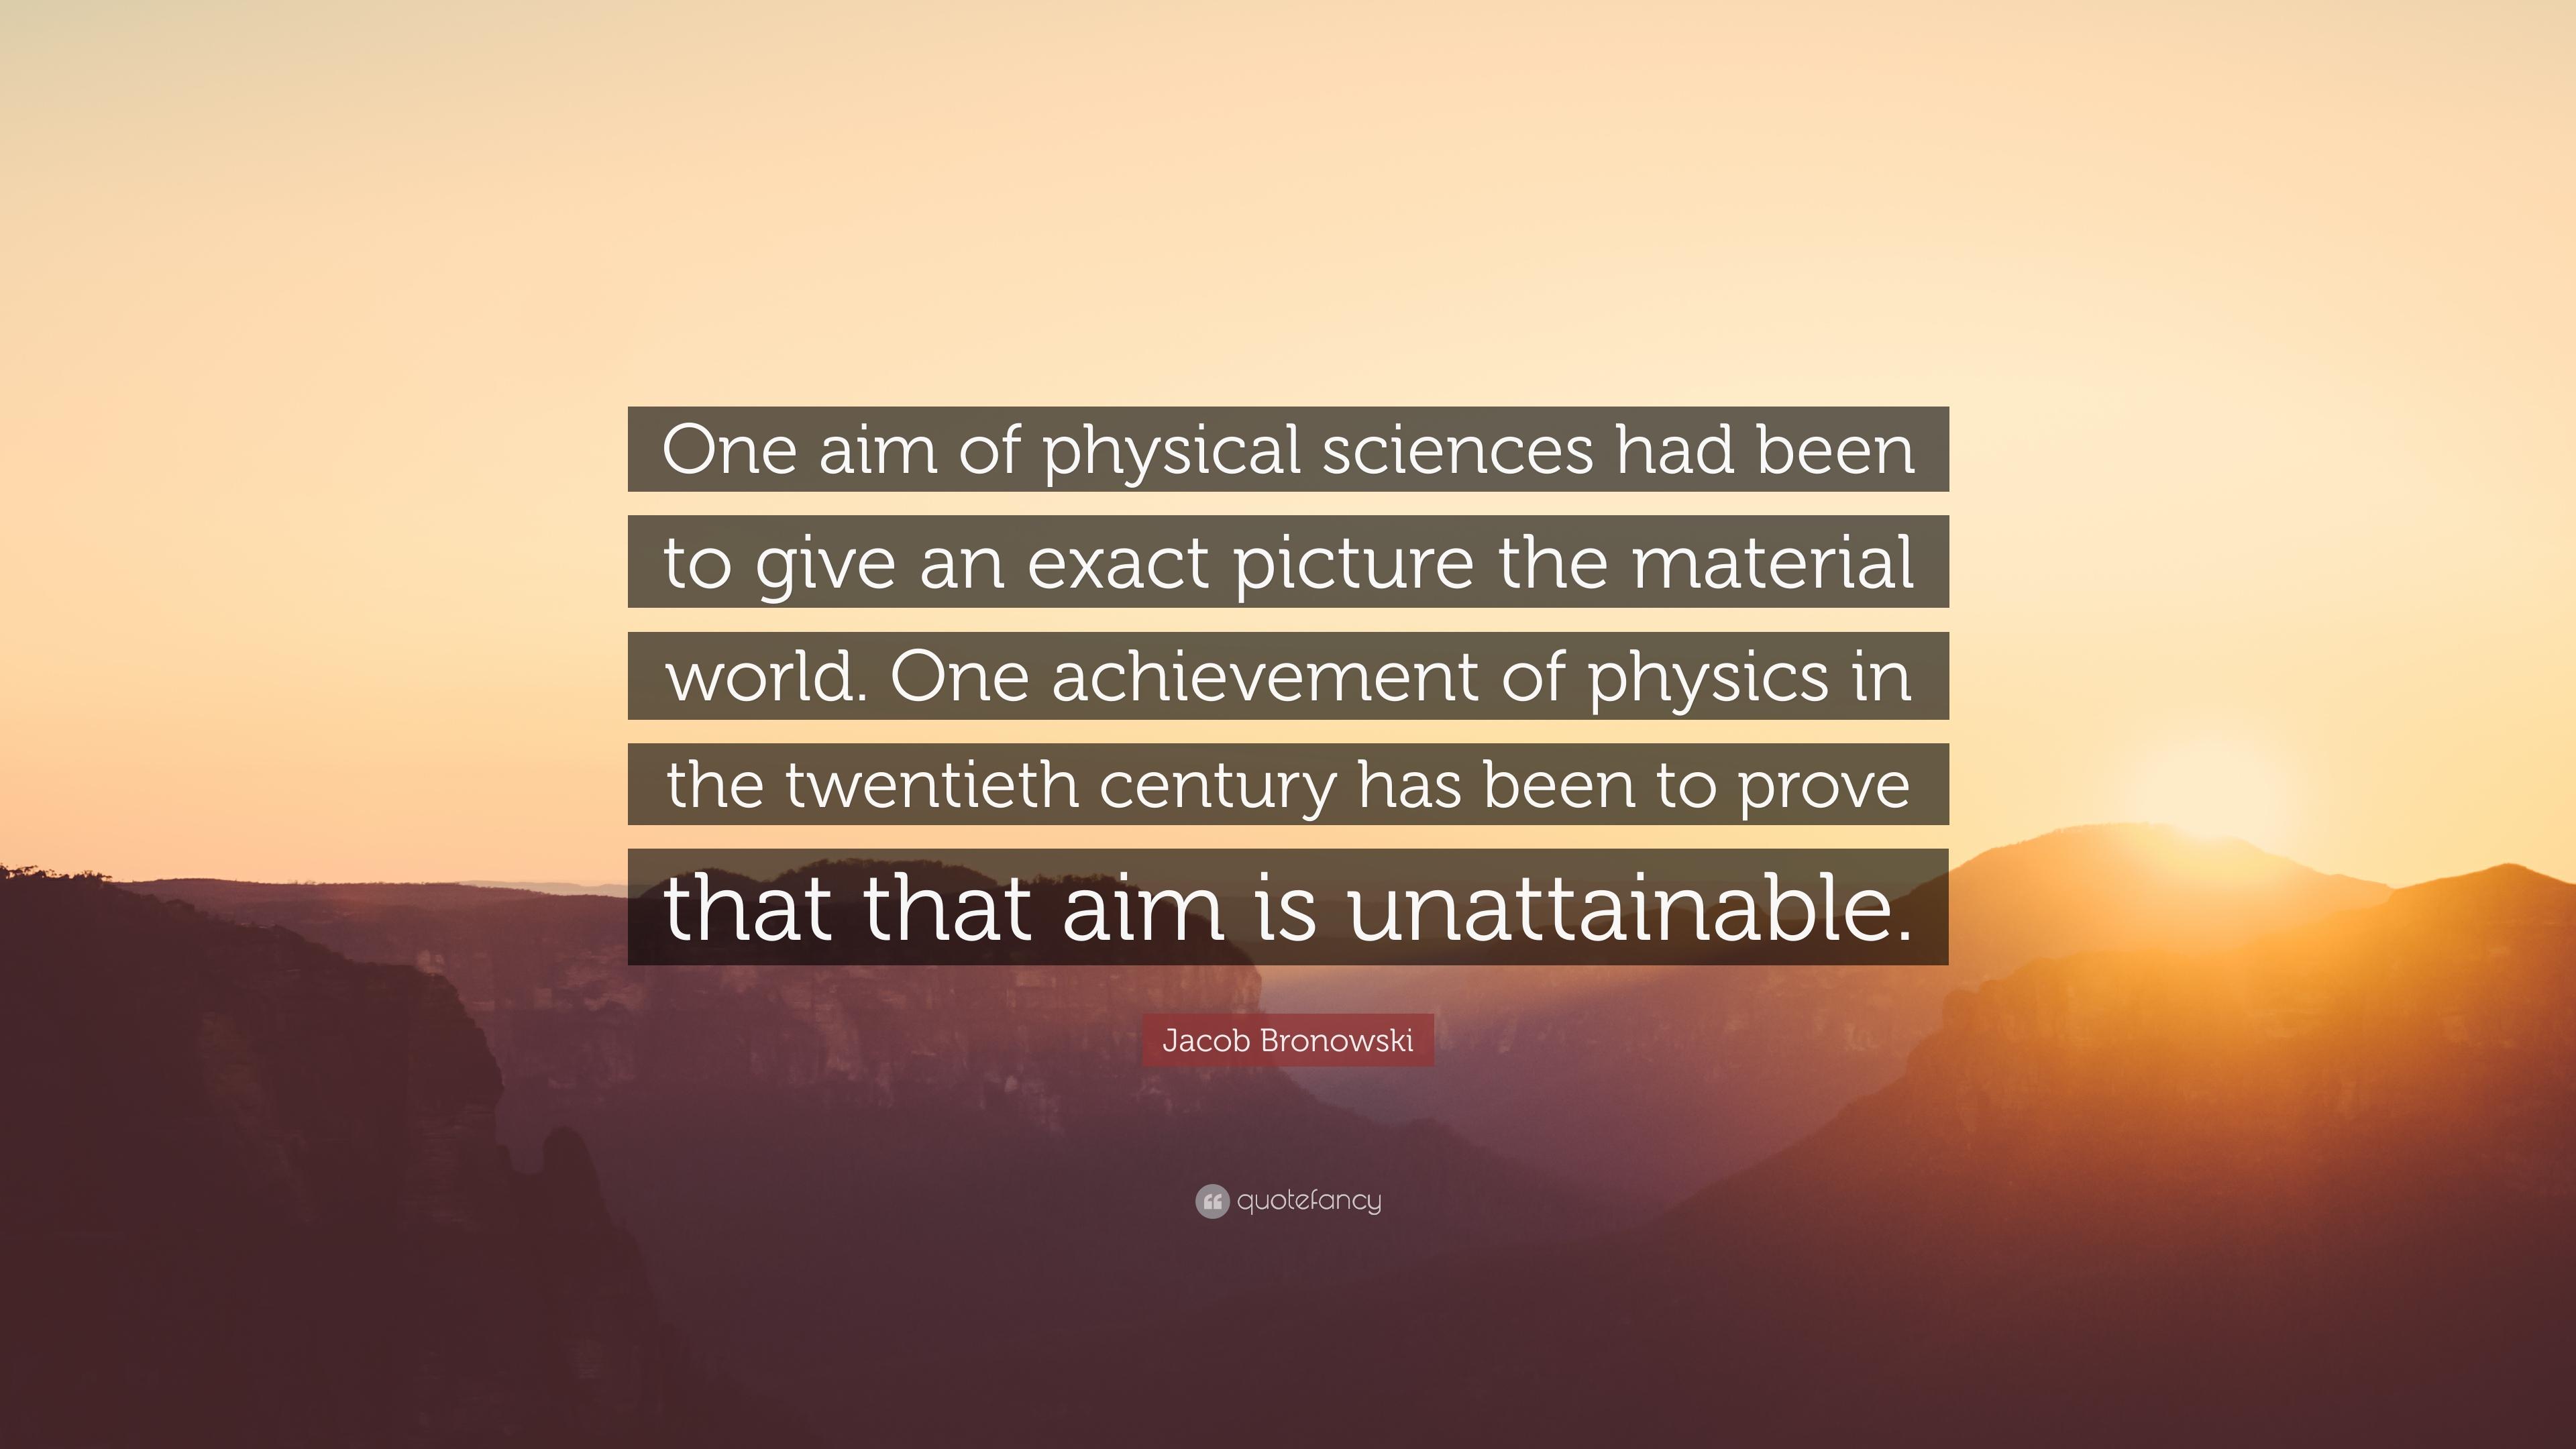 Jacob Bronowski Quote: “One aim of physical sciences had been to